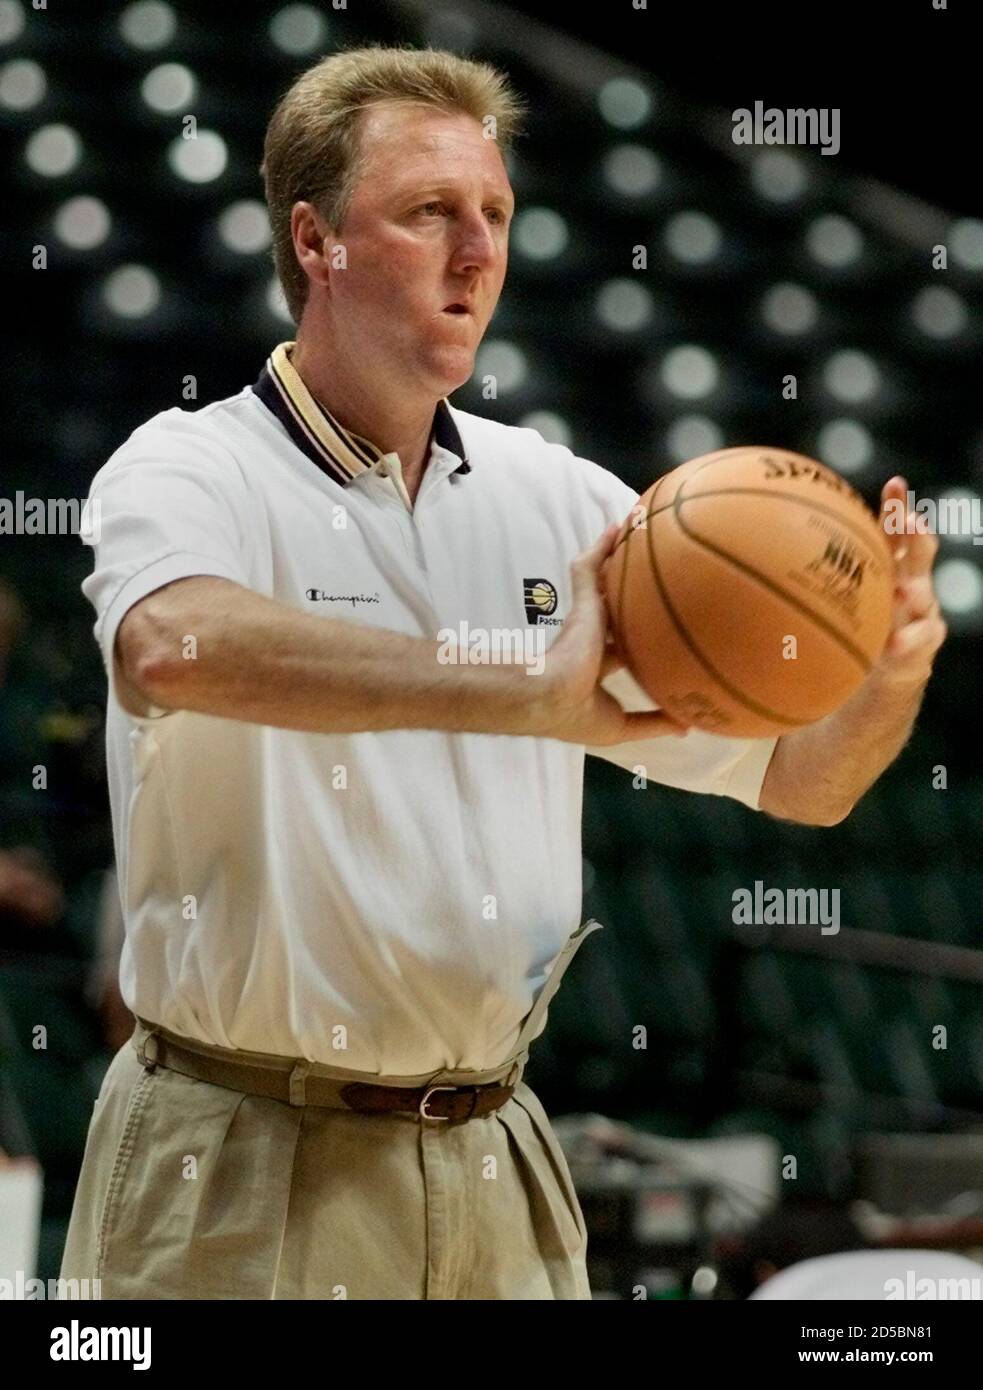 Indiana Pacers coach Larry Bird directs practice for the NBA Finals June  13. The Pacers will play the Los Angeles Lakers in Game 4 of the finals on  June 14. The Lakers